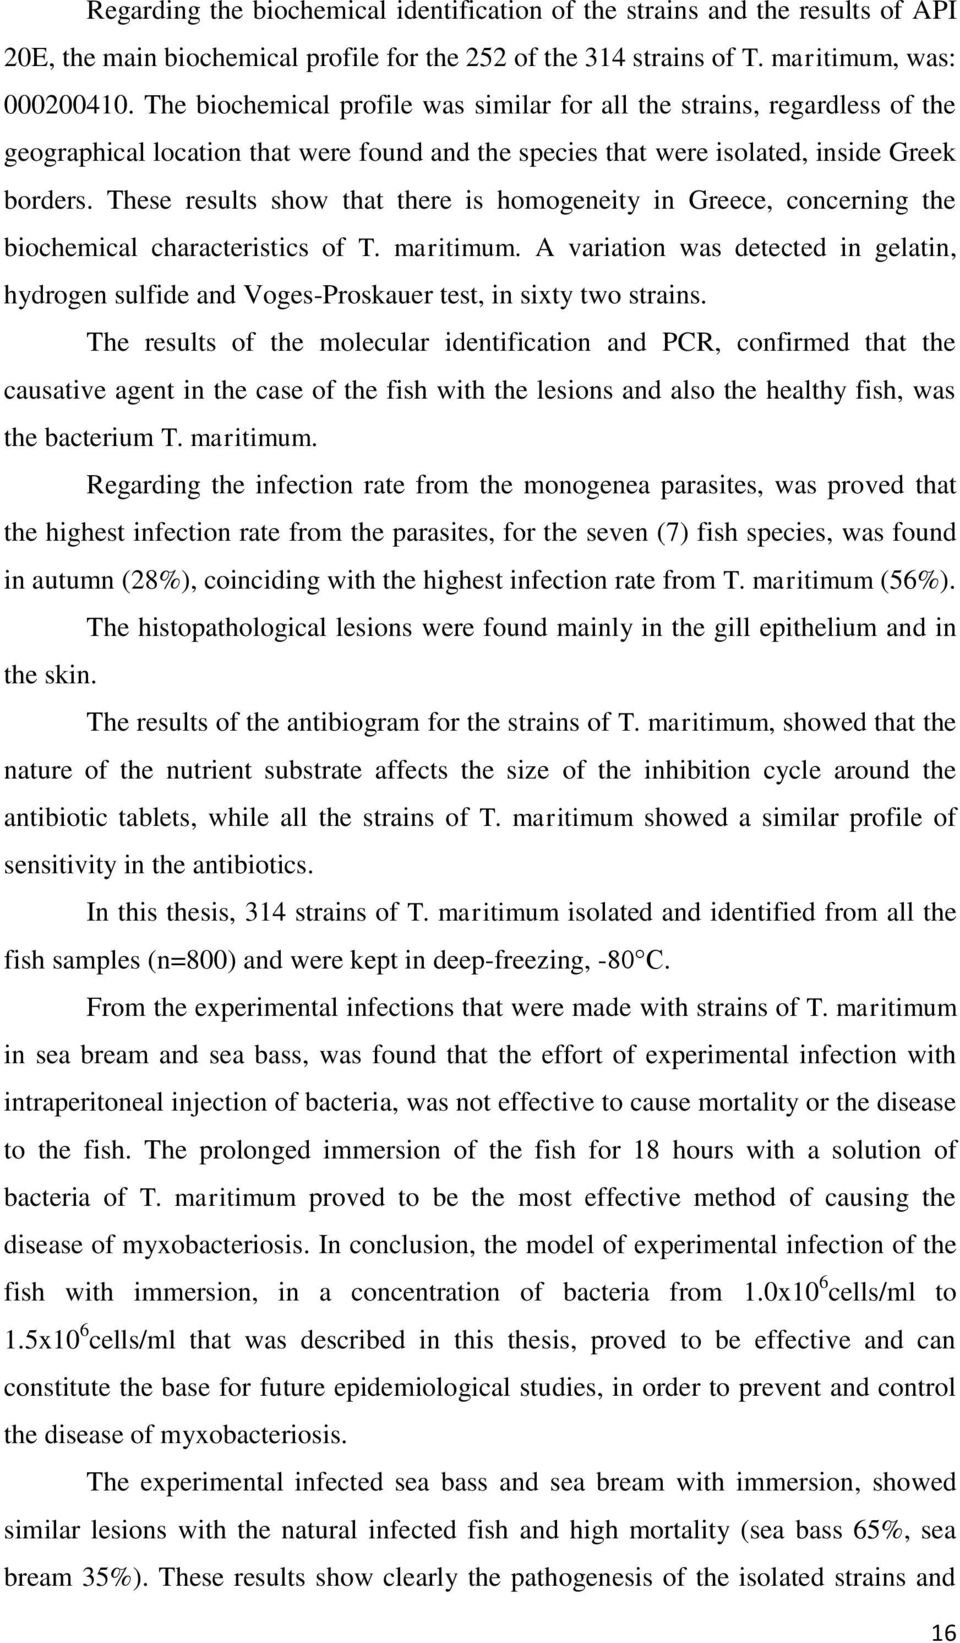 These results show that there is homogeneity in Greece, concerning the biochemical characteristics of T. maritimum.